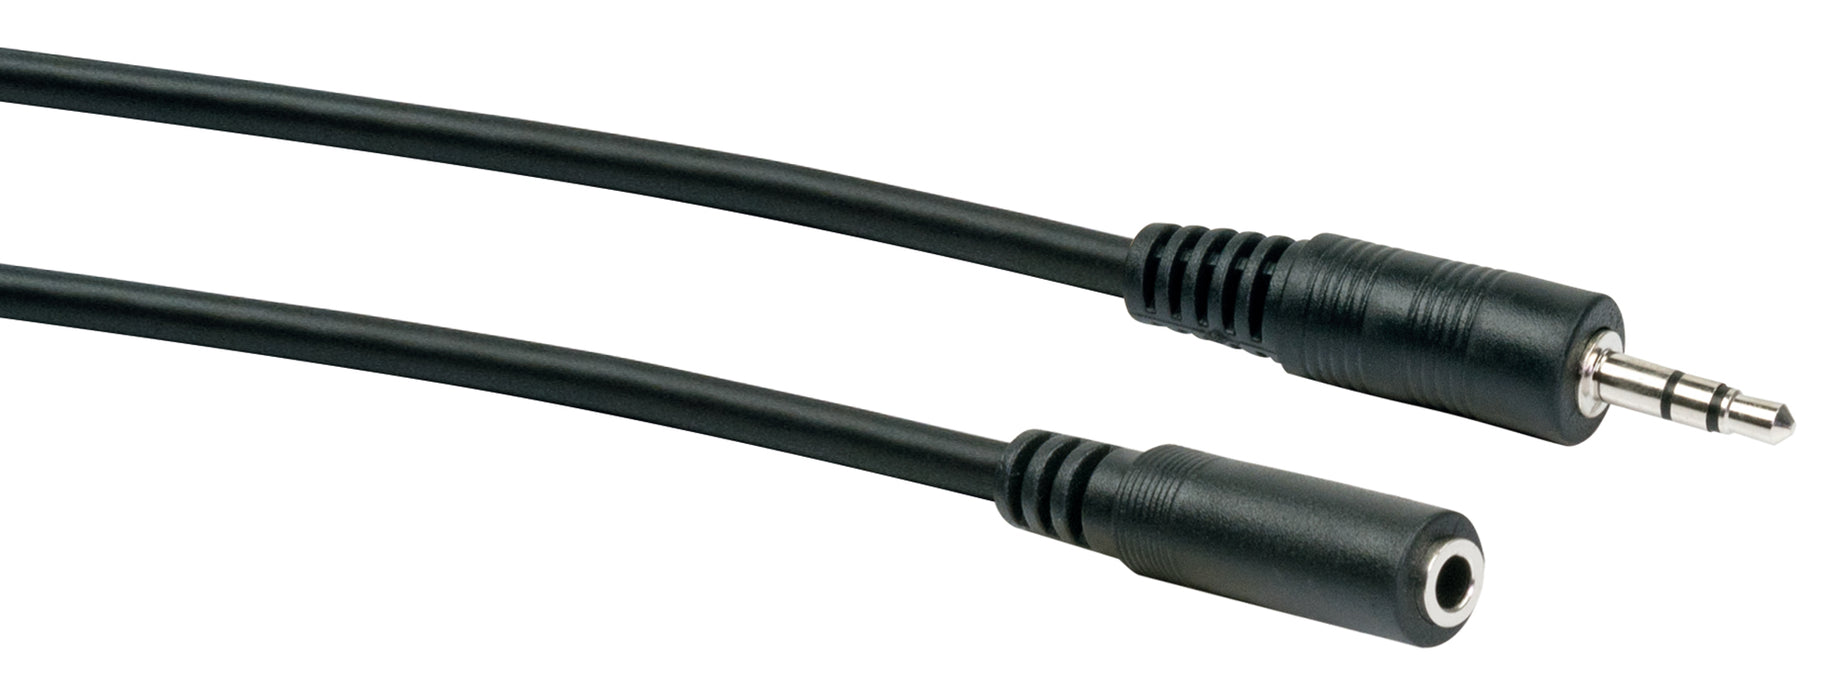 AUDIO extension cable